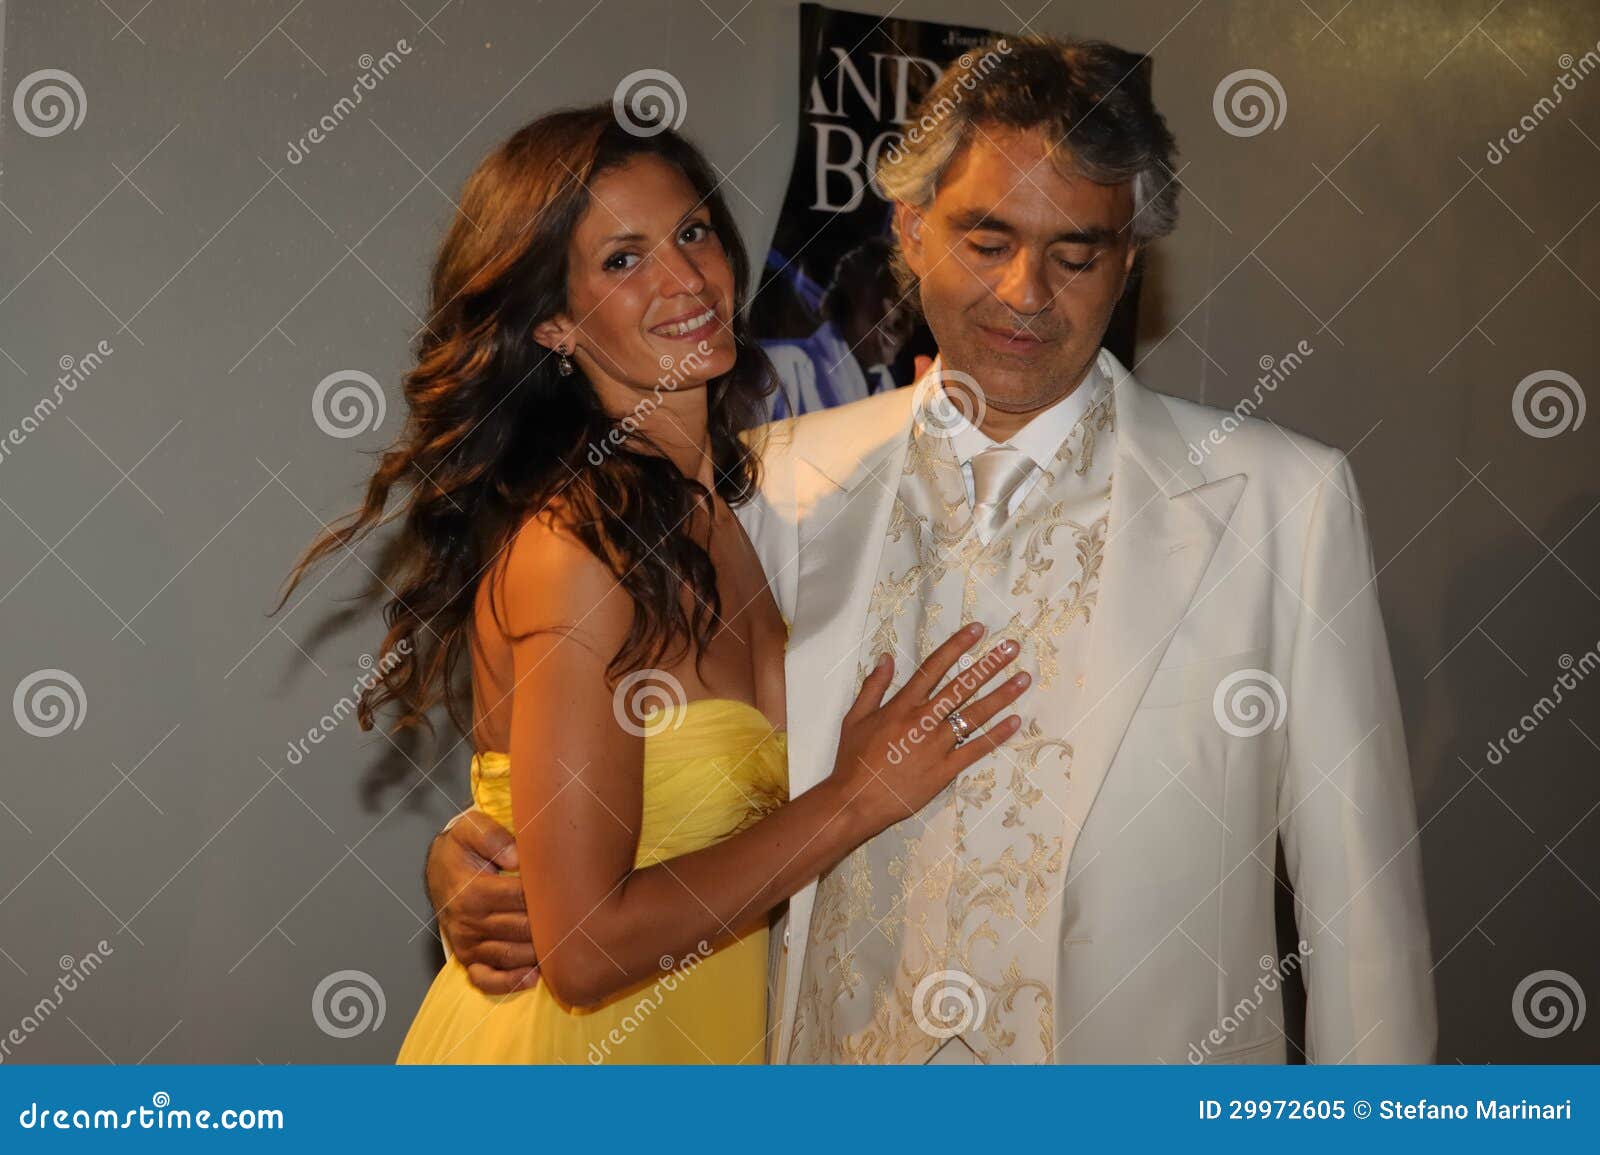 Singer Andrea Bocelli, third from left, his wife Veronica Berti